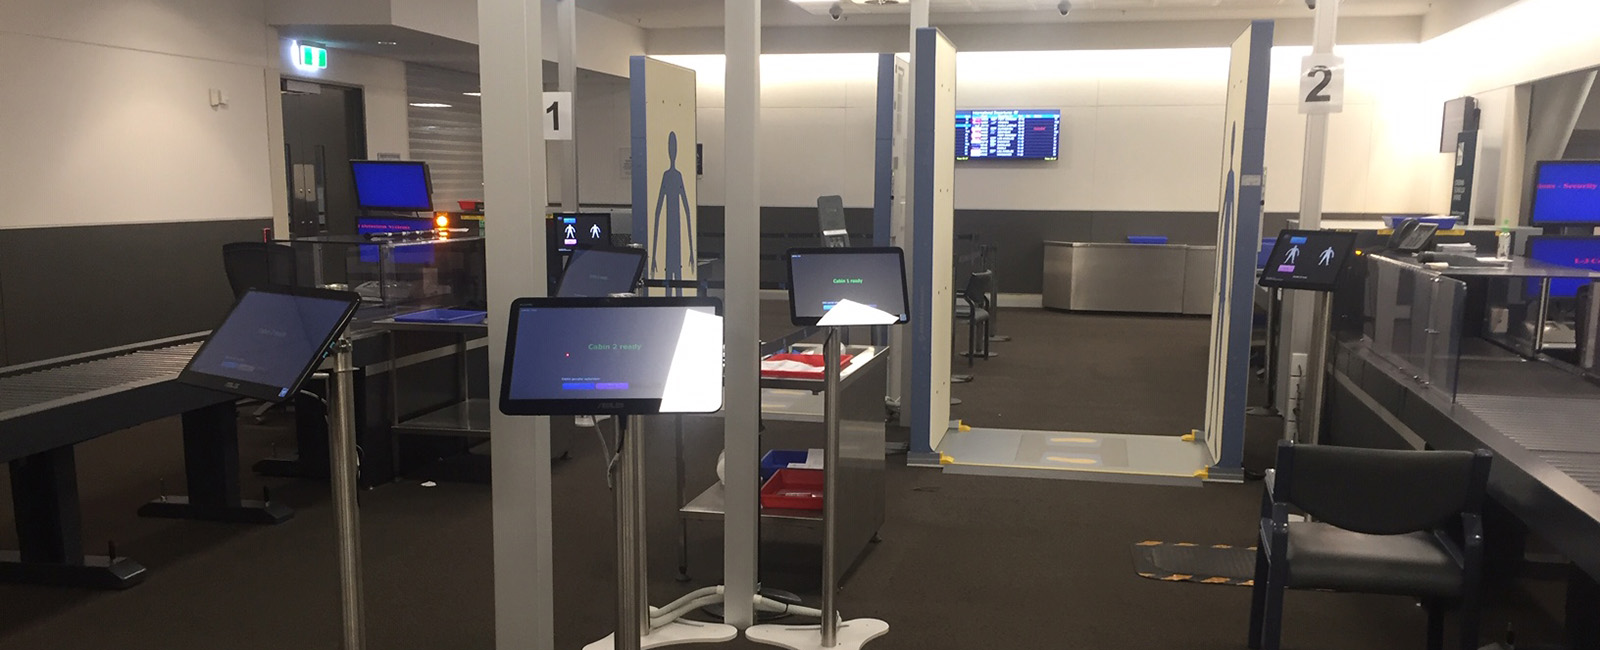 The upgraded equipment in BNE's Southern International Screening Point